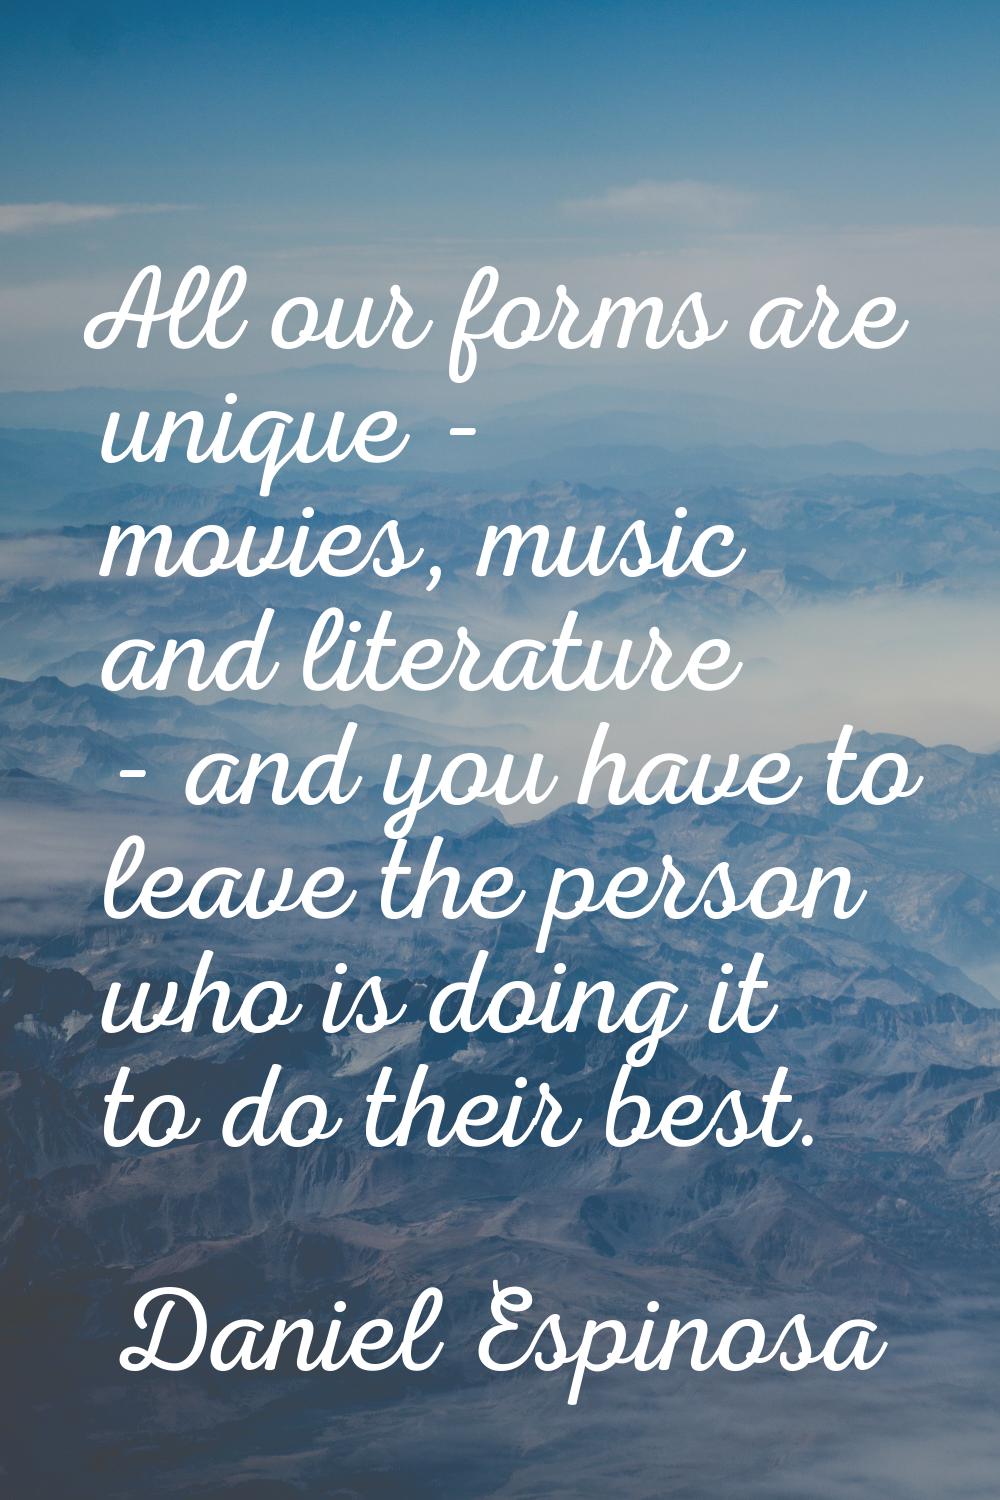 All our forms are unique - movies, music and literature - and you have to leave the person who is d